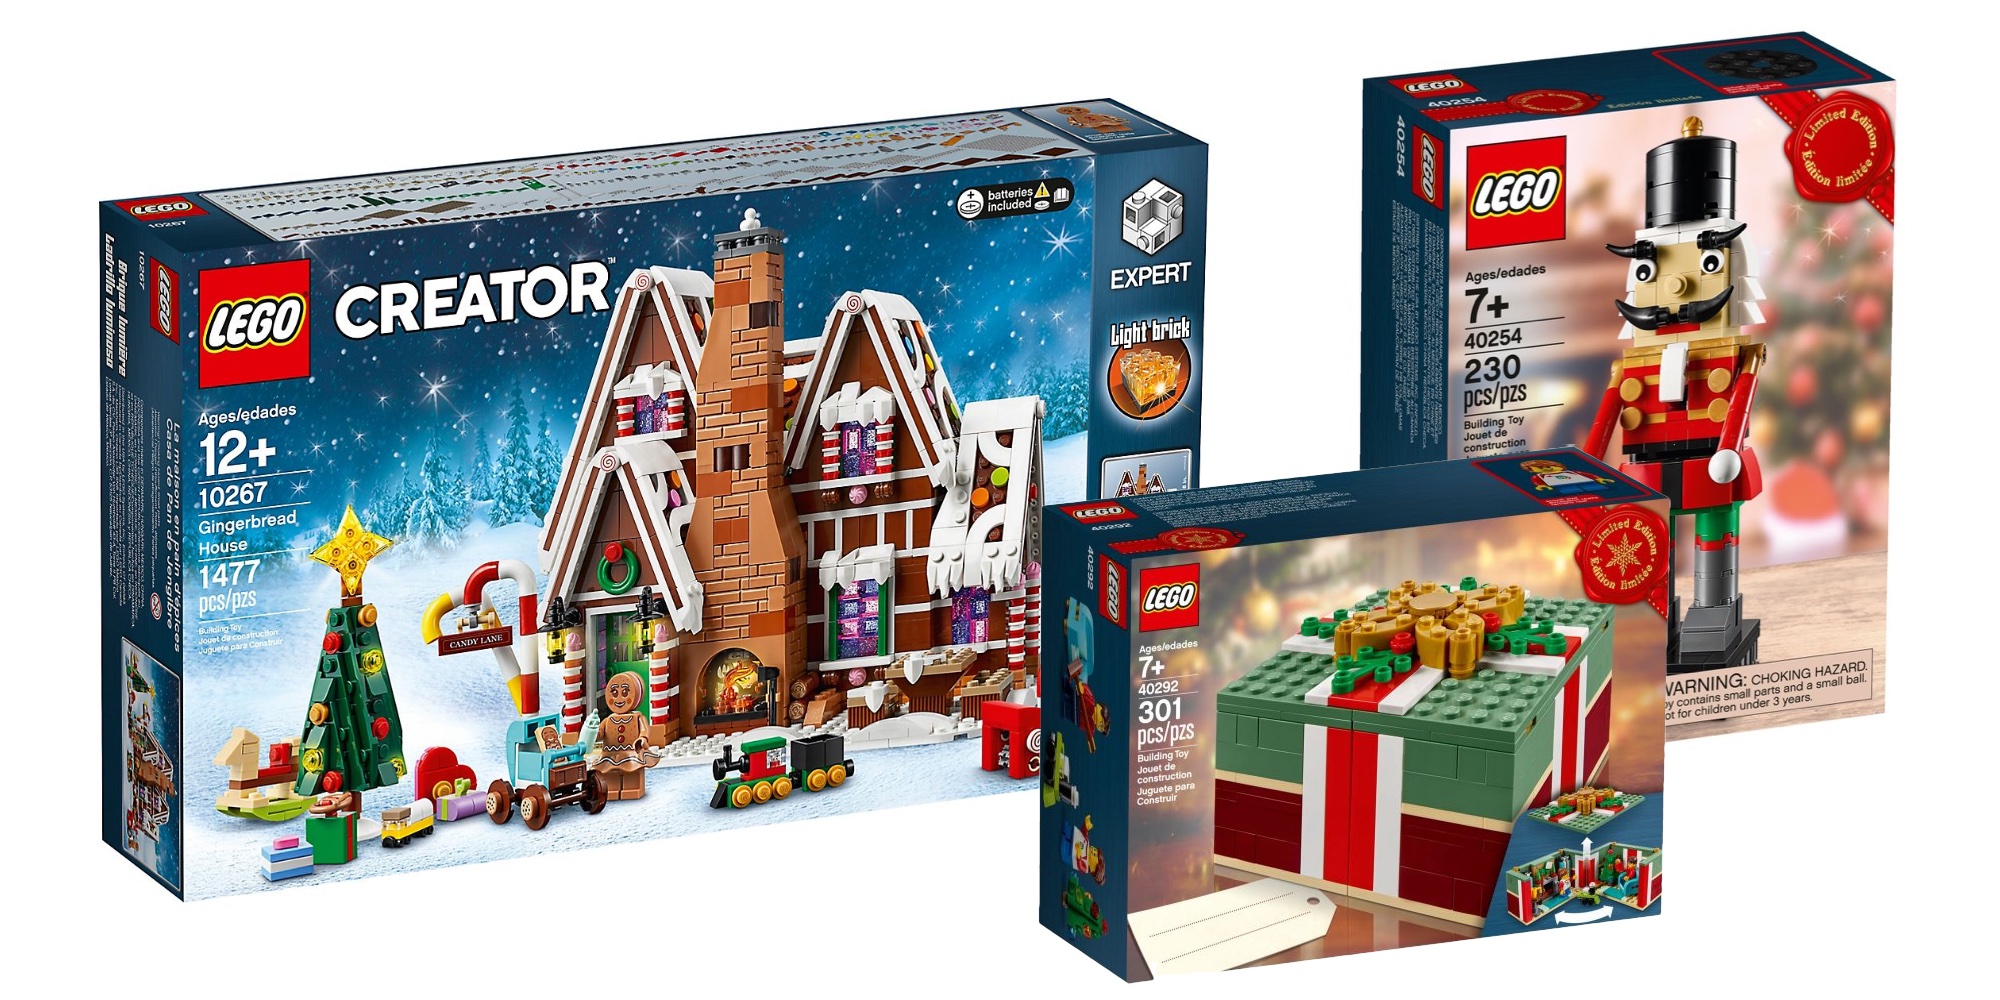 LEGO Black Friday predictions Exclusives, freebies, more 9to5Toys